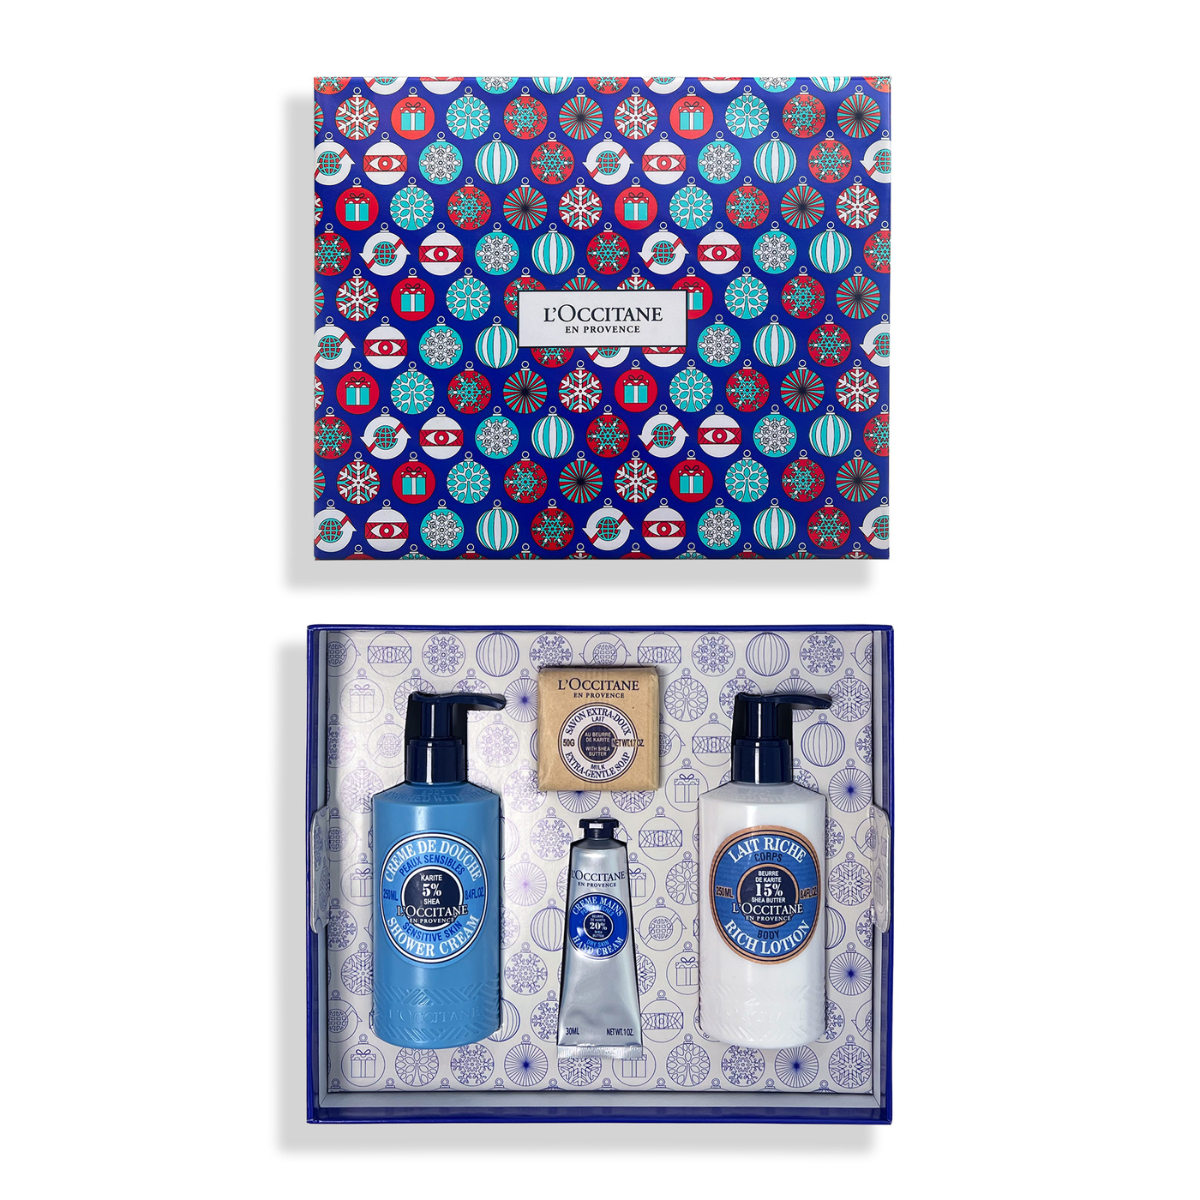 L'Occitane Nourish & Soothe Shea Butter Collection